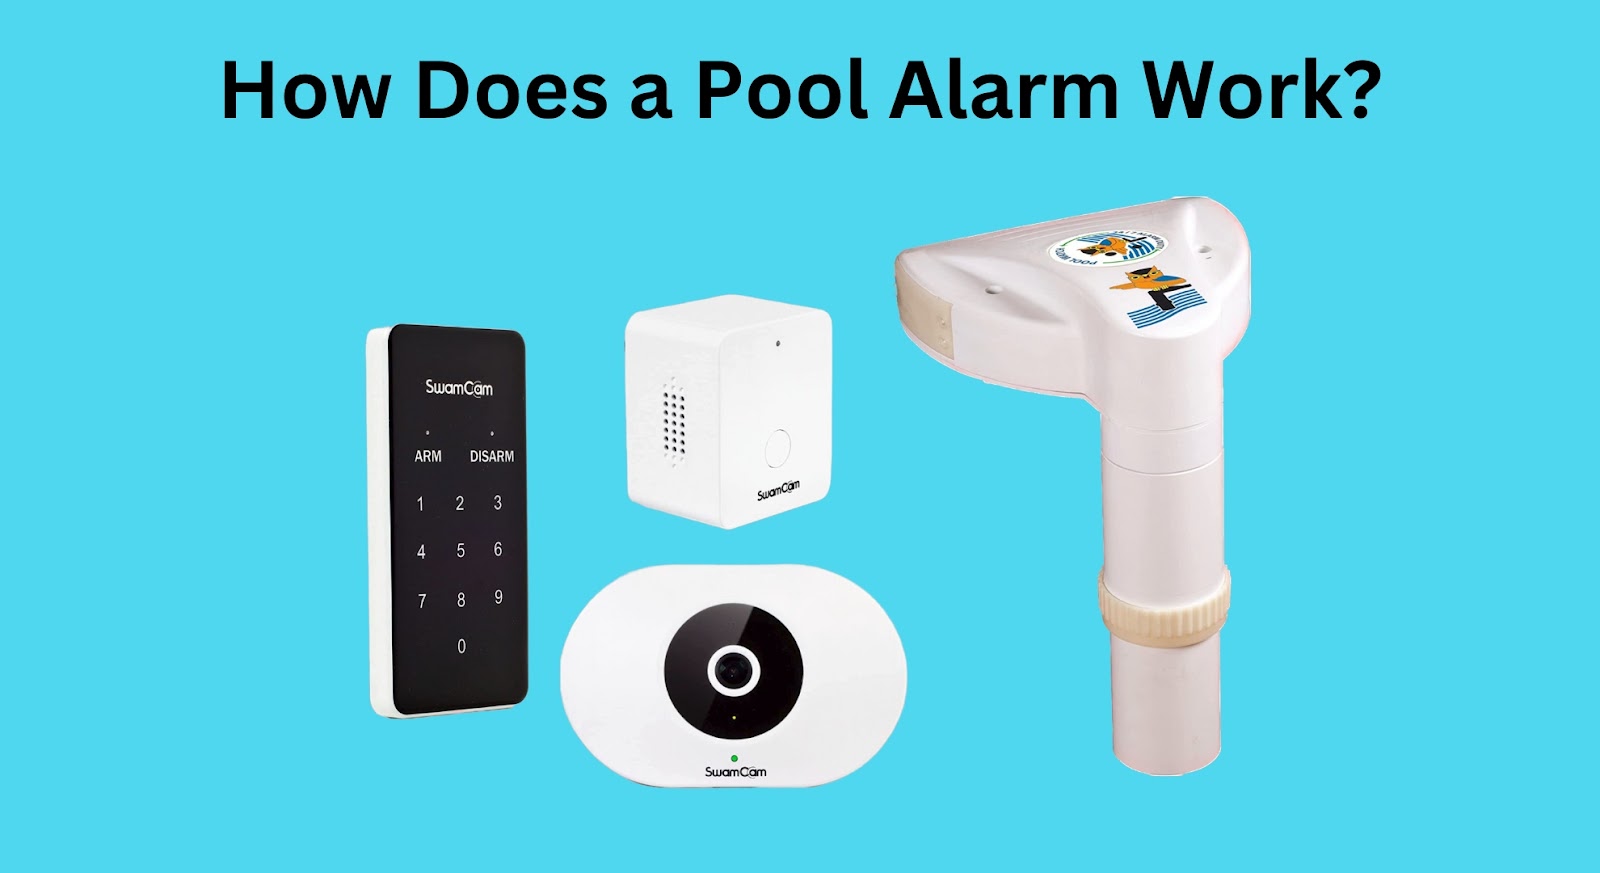 How Does a Pool Alarm Work?